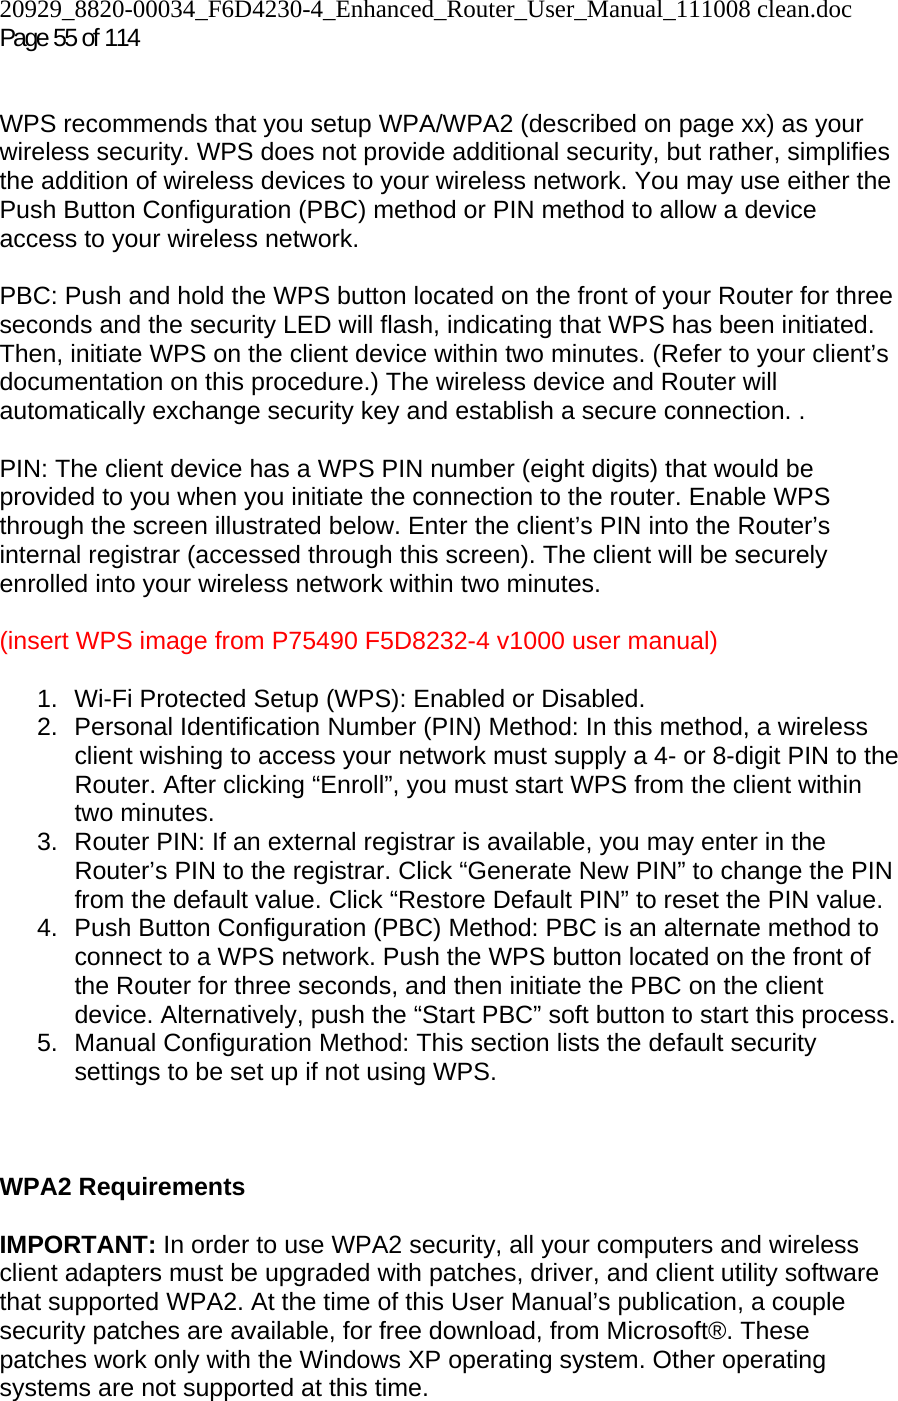 20929_8820-00034_F6D4230-4_Enhanced_Router_User_Manual_111008 clean.doc Page 55 of 114    WPS recommends that you setup WPA/WPA2 (described on page xx) as your wireless security. WPS does not provide additional security, but rather, simplifies the addition of wireless devices to your wireless network. You may use either the Push Button Configuration (PBC) method or PIN method to allow a device access to your wireless network.   PBC: Push and hold the WPS button located on the front of your Router for three seconds and the security LED will flash, indicating that WPS has been initiated. Then, initiate WPS on the client device within two minutes. (Refer to your client’s documentation on this procedure.) The wireless device and Router will automatically exchange security key and establish a secure connection. .  PIN: The client device has a WPS PIN number (eight digits) that would be provided to you when you initiate the connection to the router. Enable WPS through the screen illustrated below. Enter the client’s PIN into the Router’s internal registrar (accessed through this screen). The client will be securely enrolled into your wireless network within two minutes.  (insert WPS image from P75490 F5D8232-4 v1000 user manual)  1.  Wi-Fi Protected Setup (WPS): Enabled or Disabled. 2. Personal Identification Number (PIN) Method: In this method, a wireless client wishing to access your network must supply a 4- or 8-digit PIN to the Router. After clicking “Enroll”, you must start WPS from the client within two minutes. 3.  Router PIN: If an external registrar is available, you may enter in the Router’s PIN to the registrar. Click “Generate New PIN” to change the PIN from the default value. Click “Restore Default PIN” to reset the PIN value. 4.  Push Button Configuration (PBC) Method: PBC is an alternate method to connect to a WPS network. Push the WPS button located on the front of the Router for three seconds, and then initiate the PBC on the client device. Alternatively, push the “Start PBC” soft button to start this process. 5. Manual Configuration Method: This section lists the default security settings to be set up if not using WPS.    WPA2 Requirements  IMPORTANT: In order to use WPA2 security, all your computers and wireless client adapters must be upgraded with patches, driver, and client utility software that supported WPA2. At the time of this User Manual’s publication, a couple security patches are available, for free download, from Microsoft®. These patches work only with the Windows XP operating system. Other operating systems are not supported at this time.  